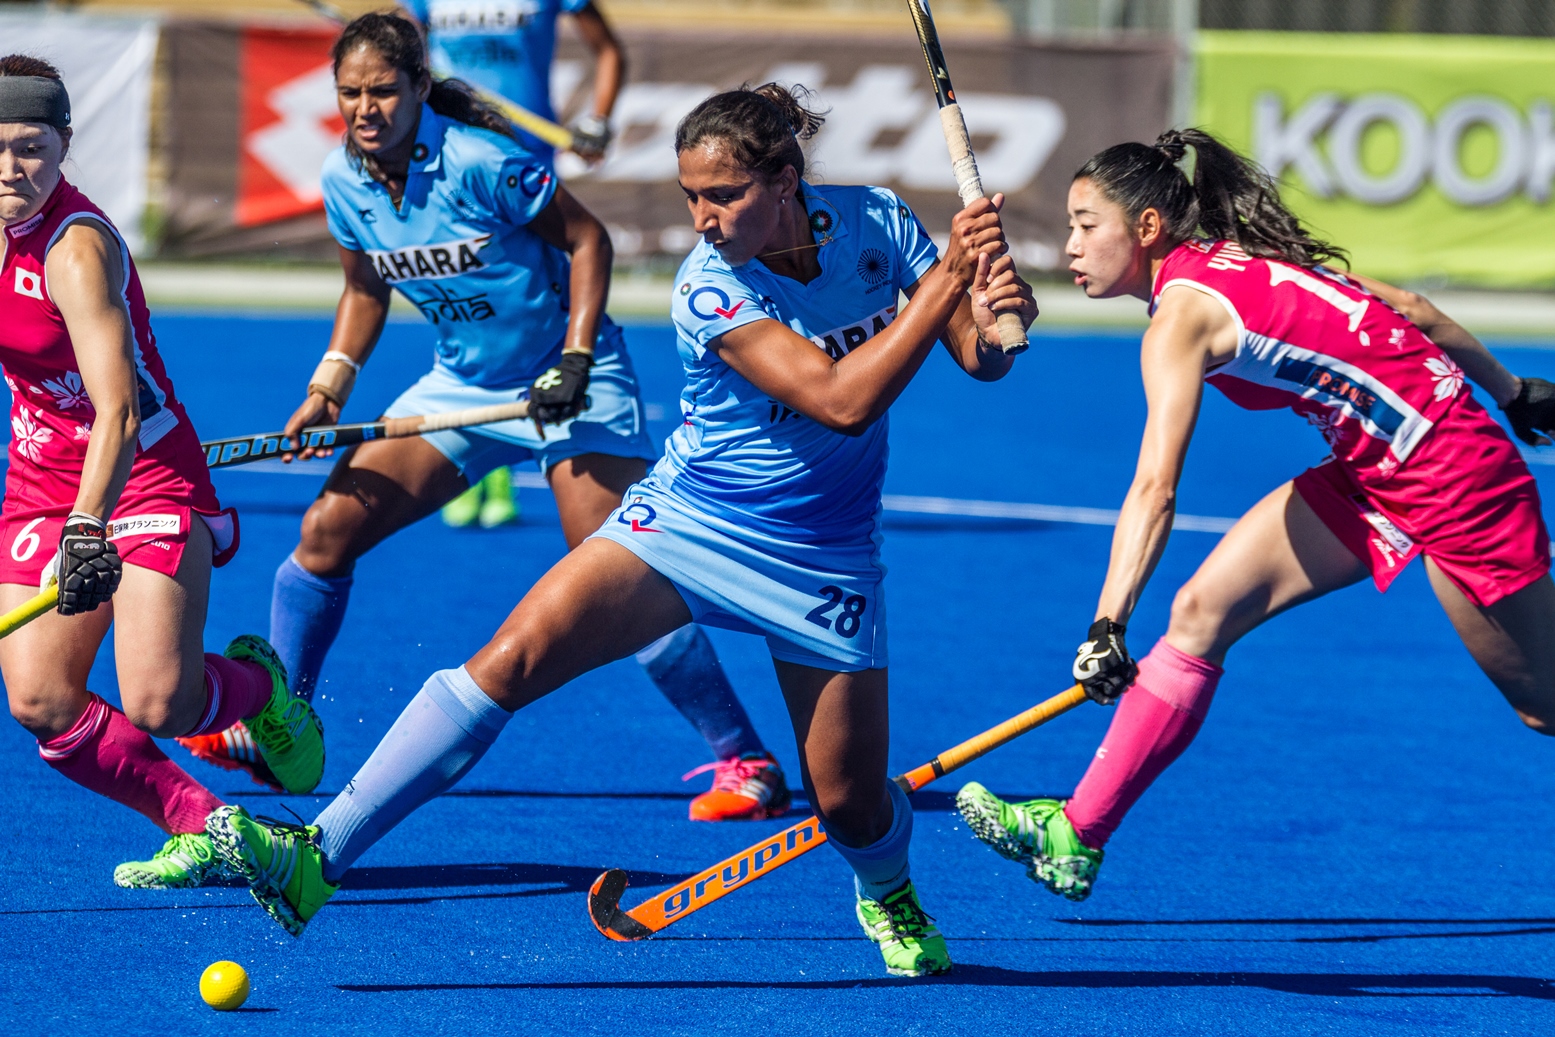 Hawke’s Bay Cup: Indian eves suffer defeat against Japan in quarters